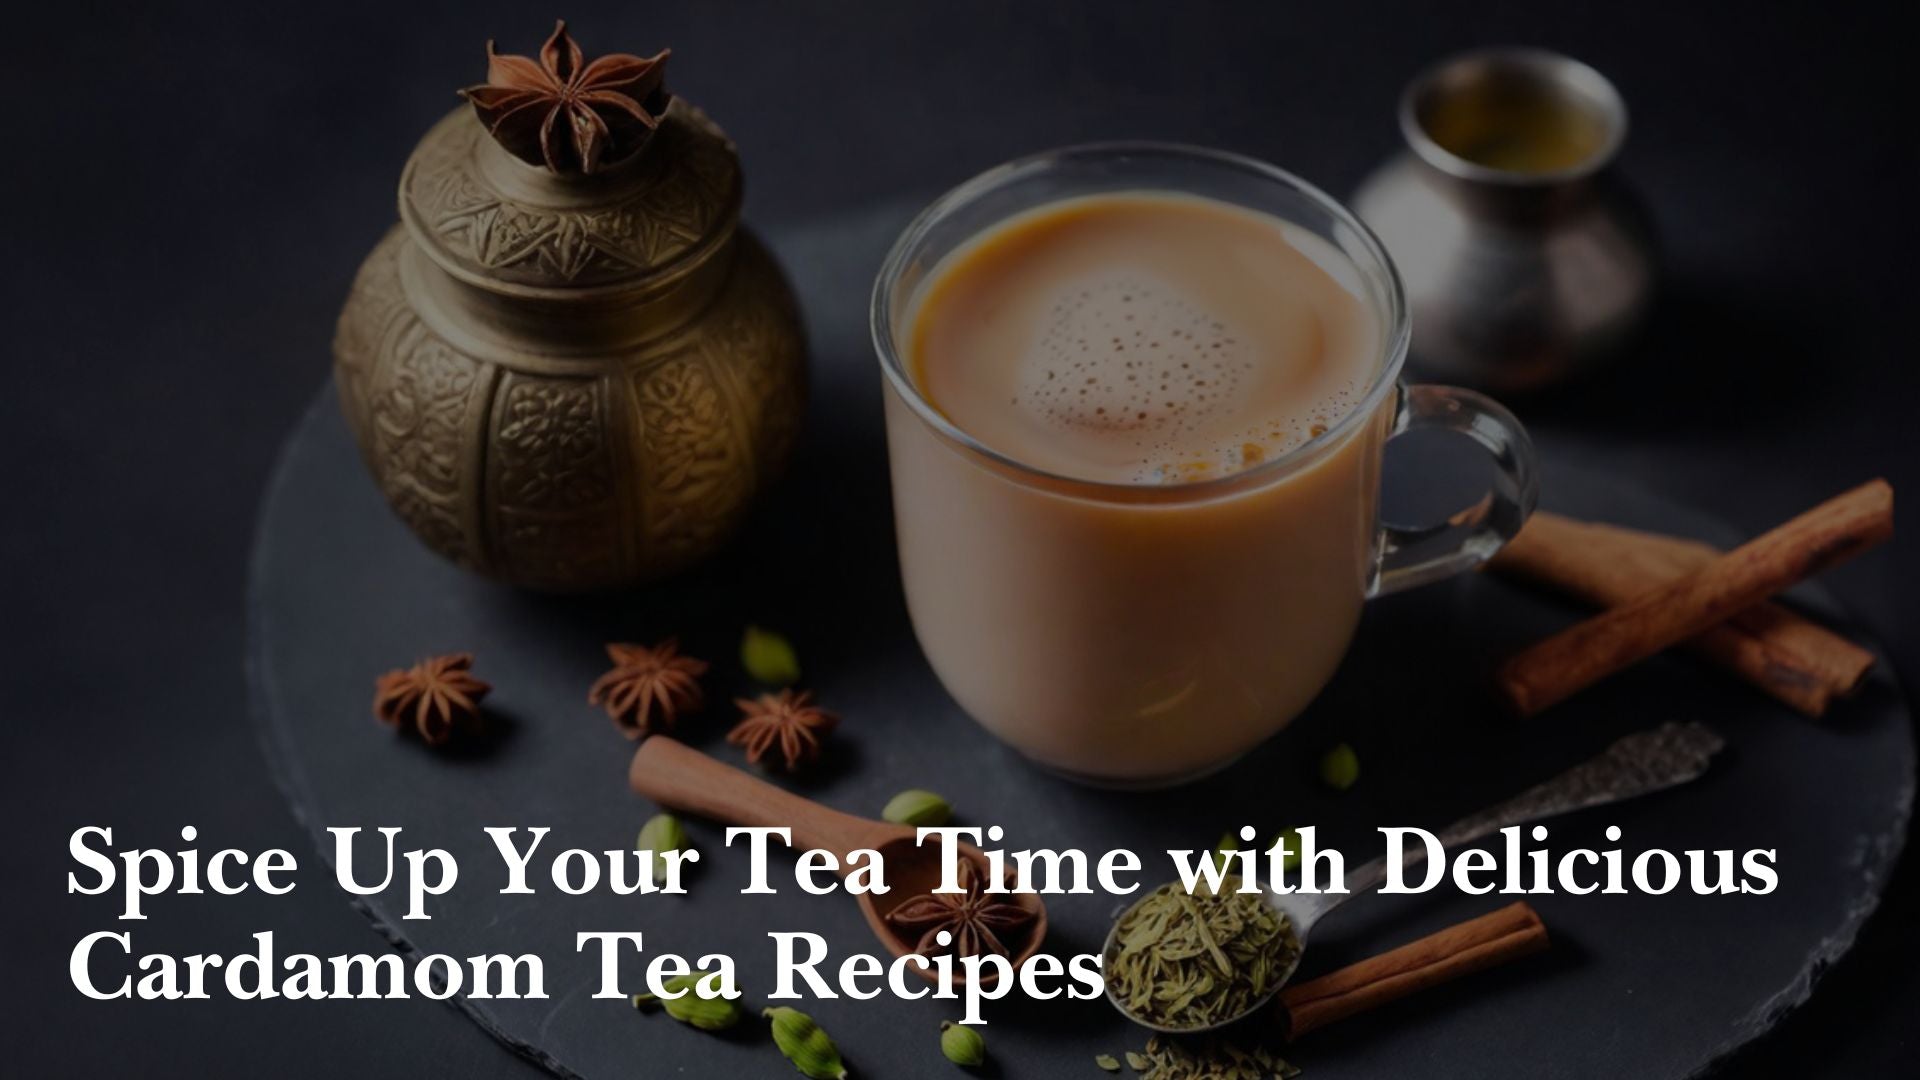 Spice Up Your Tea Time with Delicious Cardamom Tea Recipes